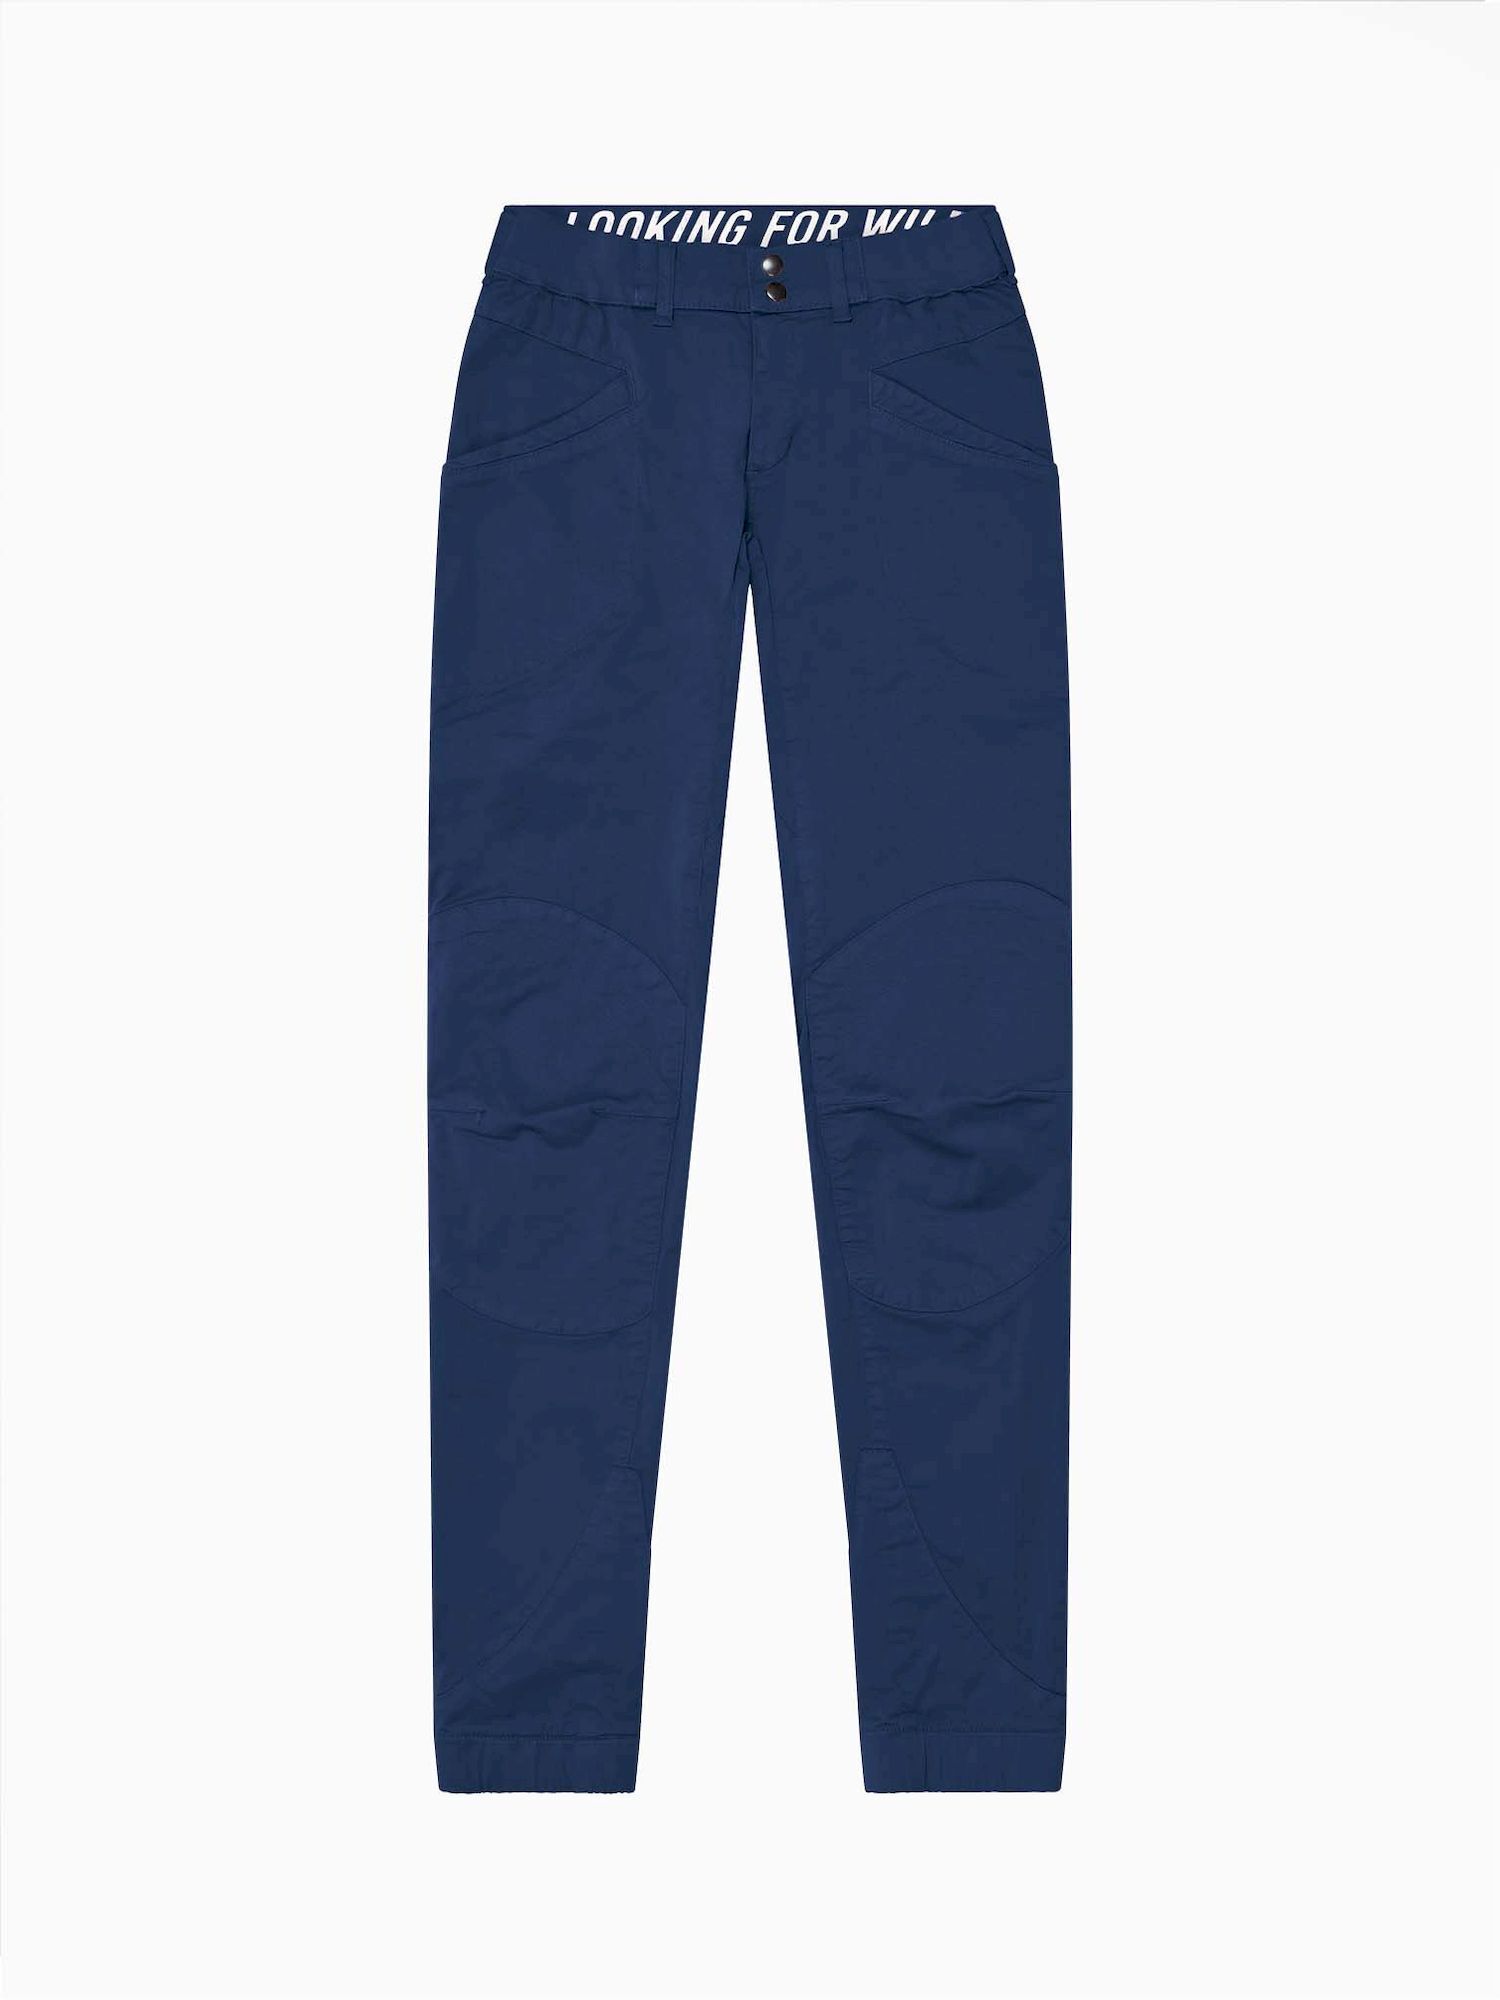 looking for wild laila peak pant climbing trousers womens